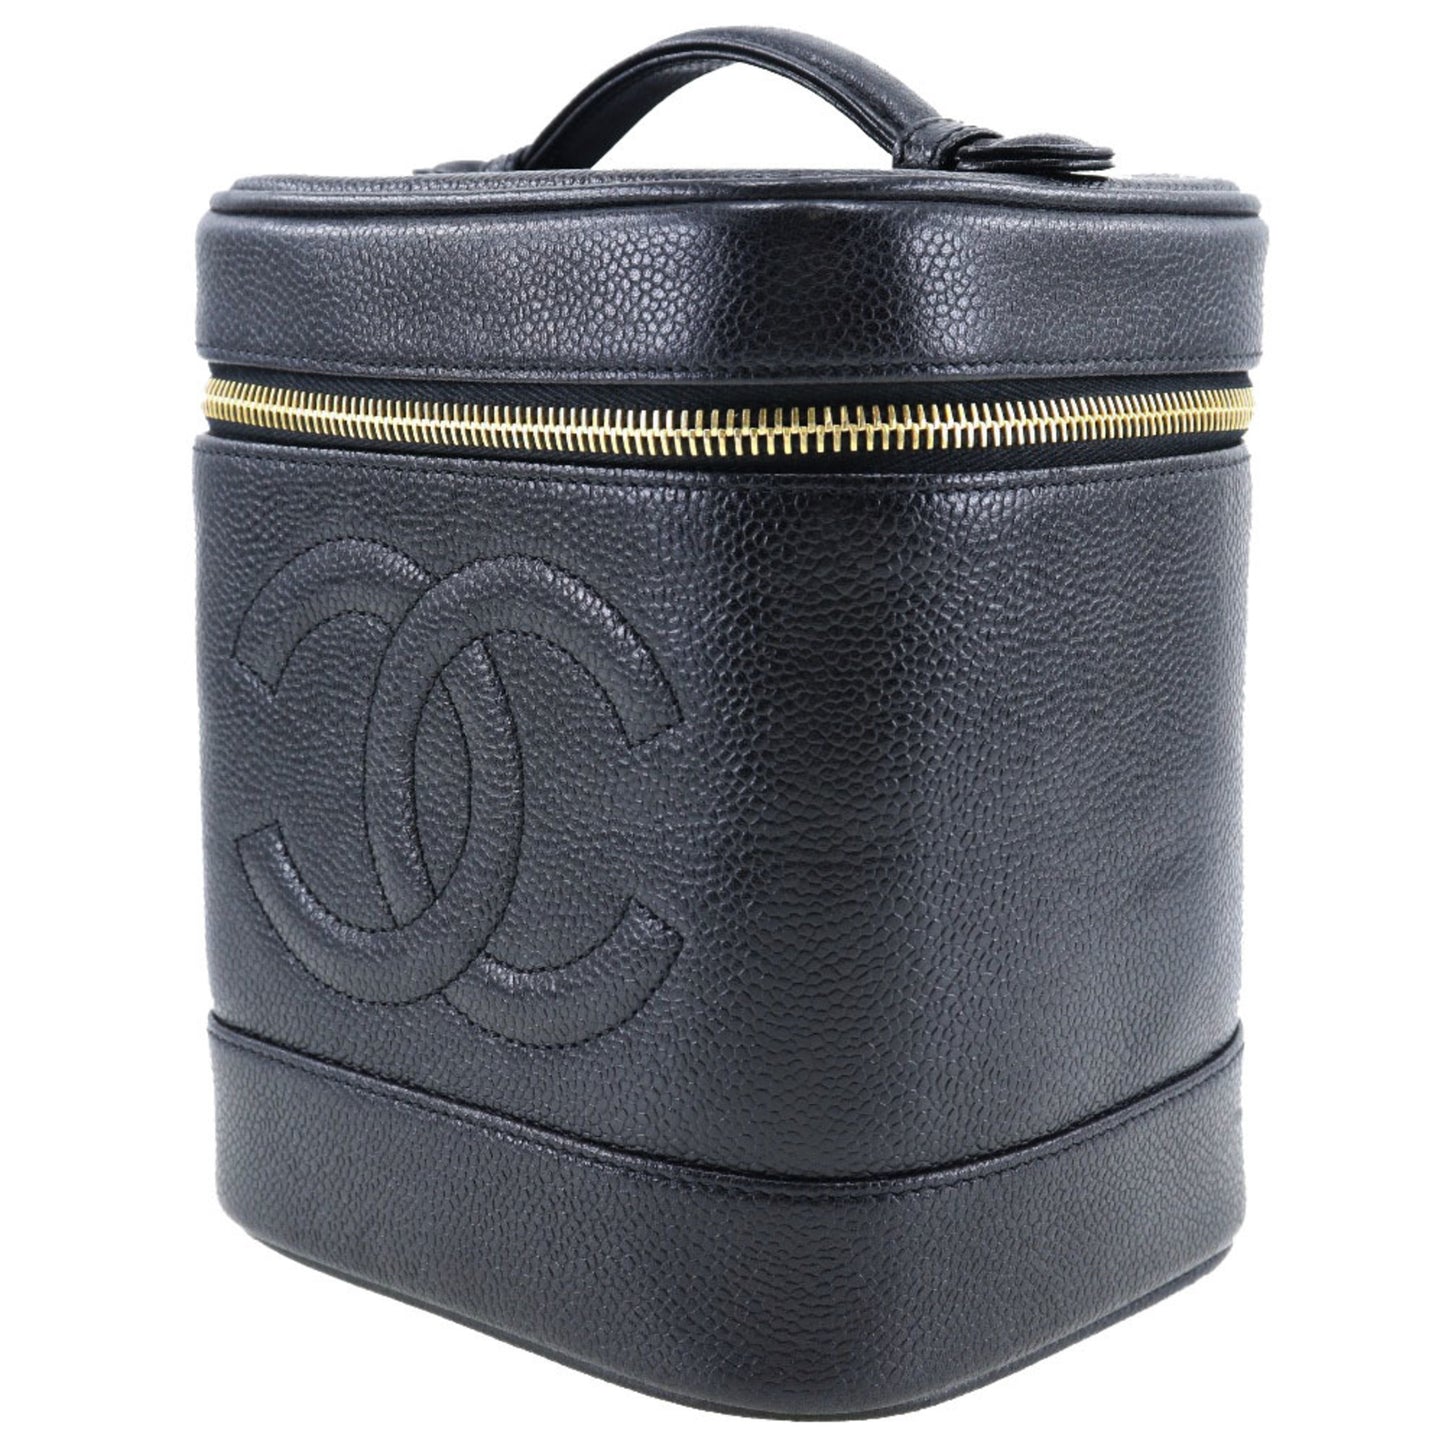 Chanel Women's Leather Vanity Handbag with Timeless Design - Excellent Condition in Black